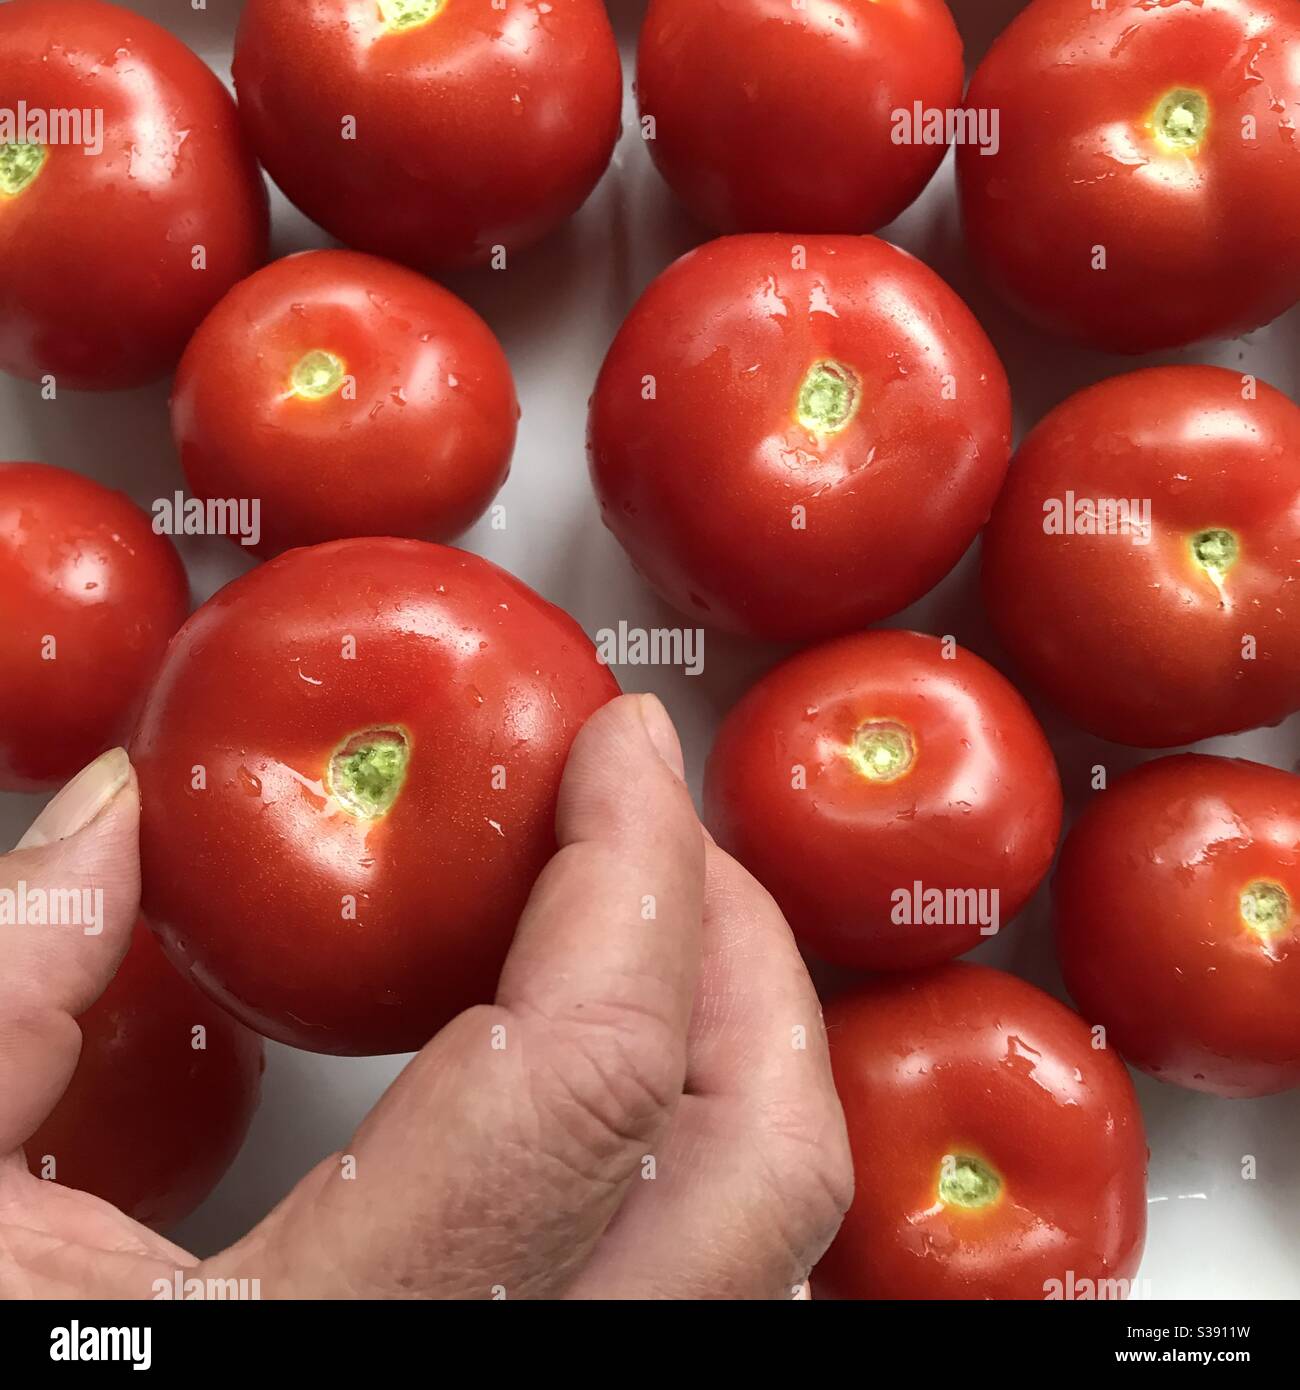 Man’s hand choosing and holding a tomato Stock Photo